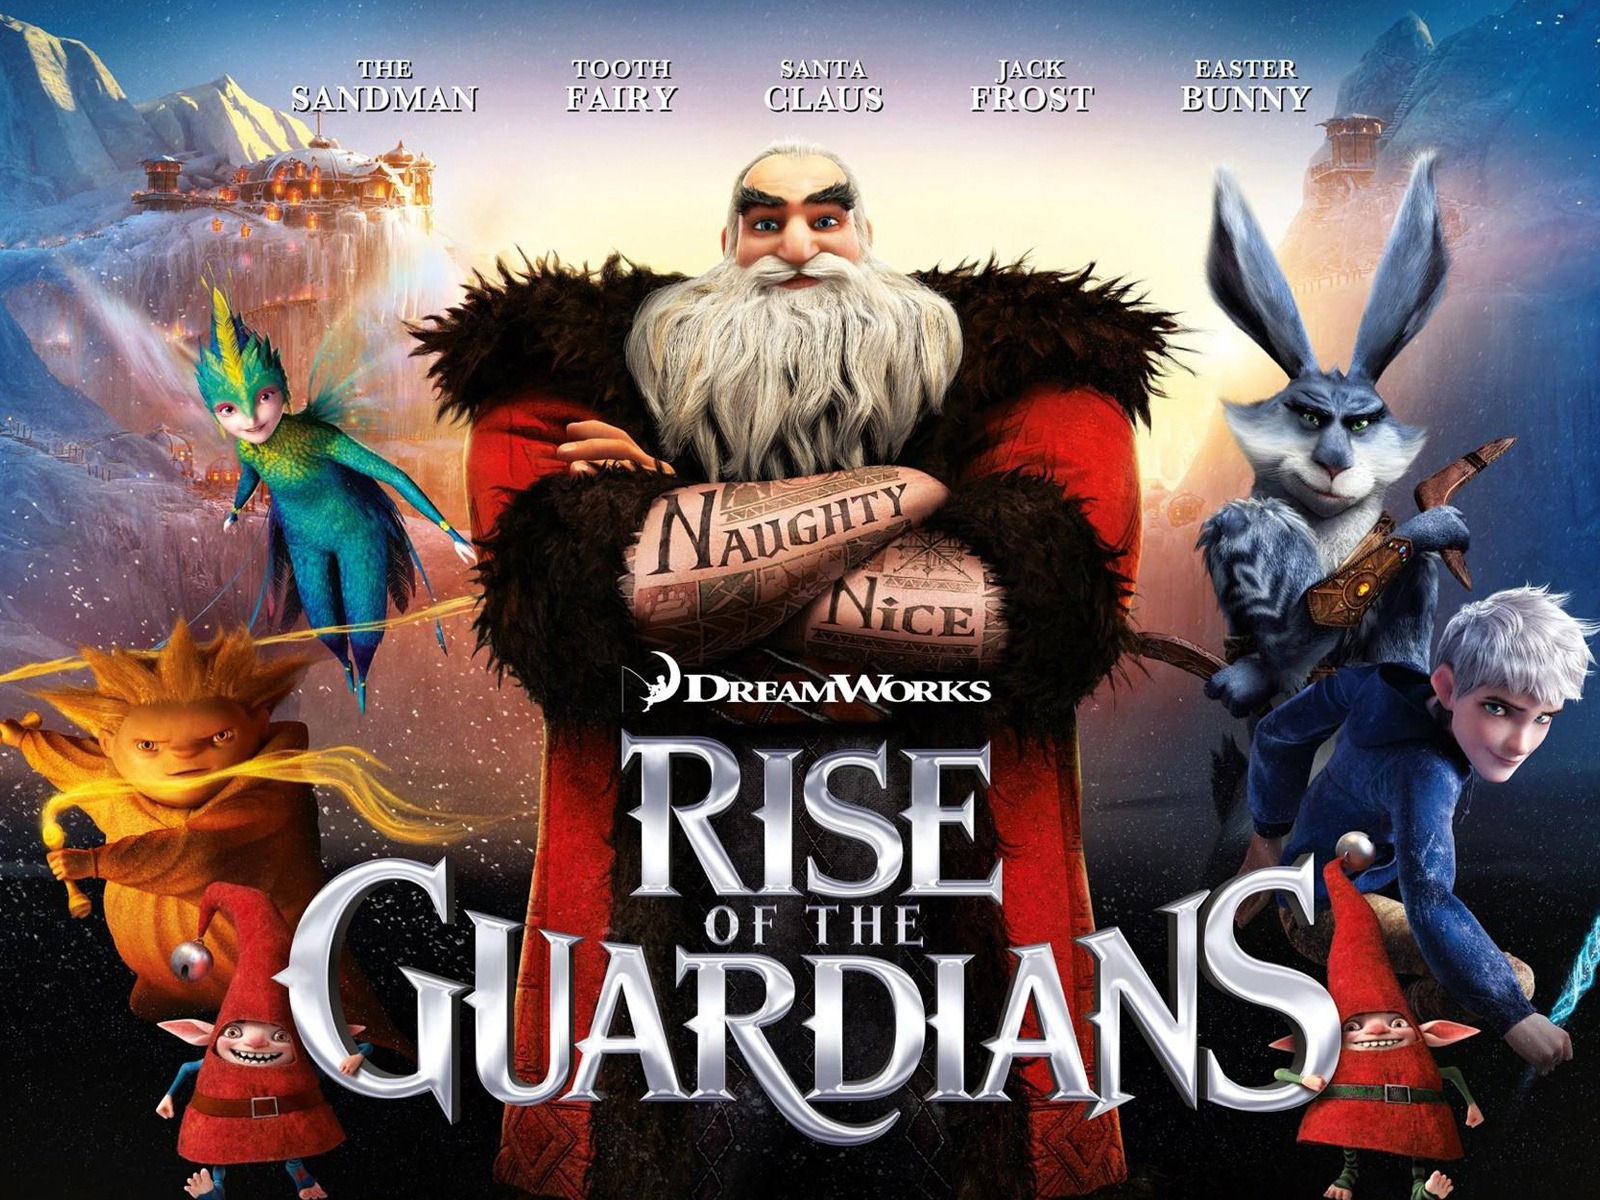 Rise of the Guardians HD wallpapers #11 - 1600x1200